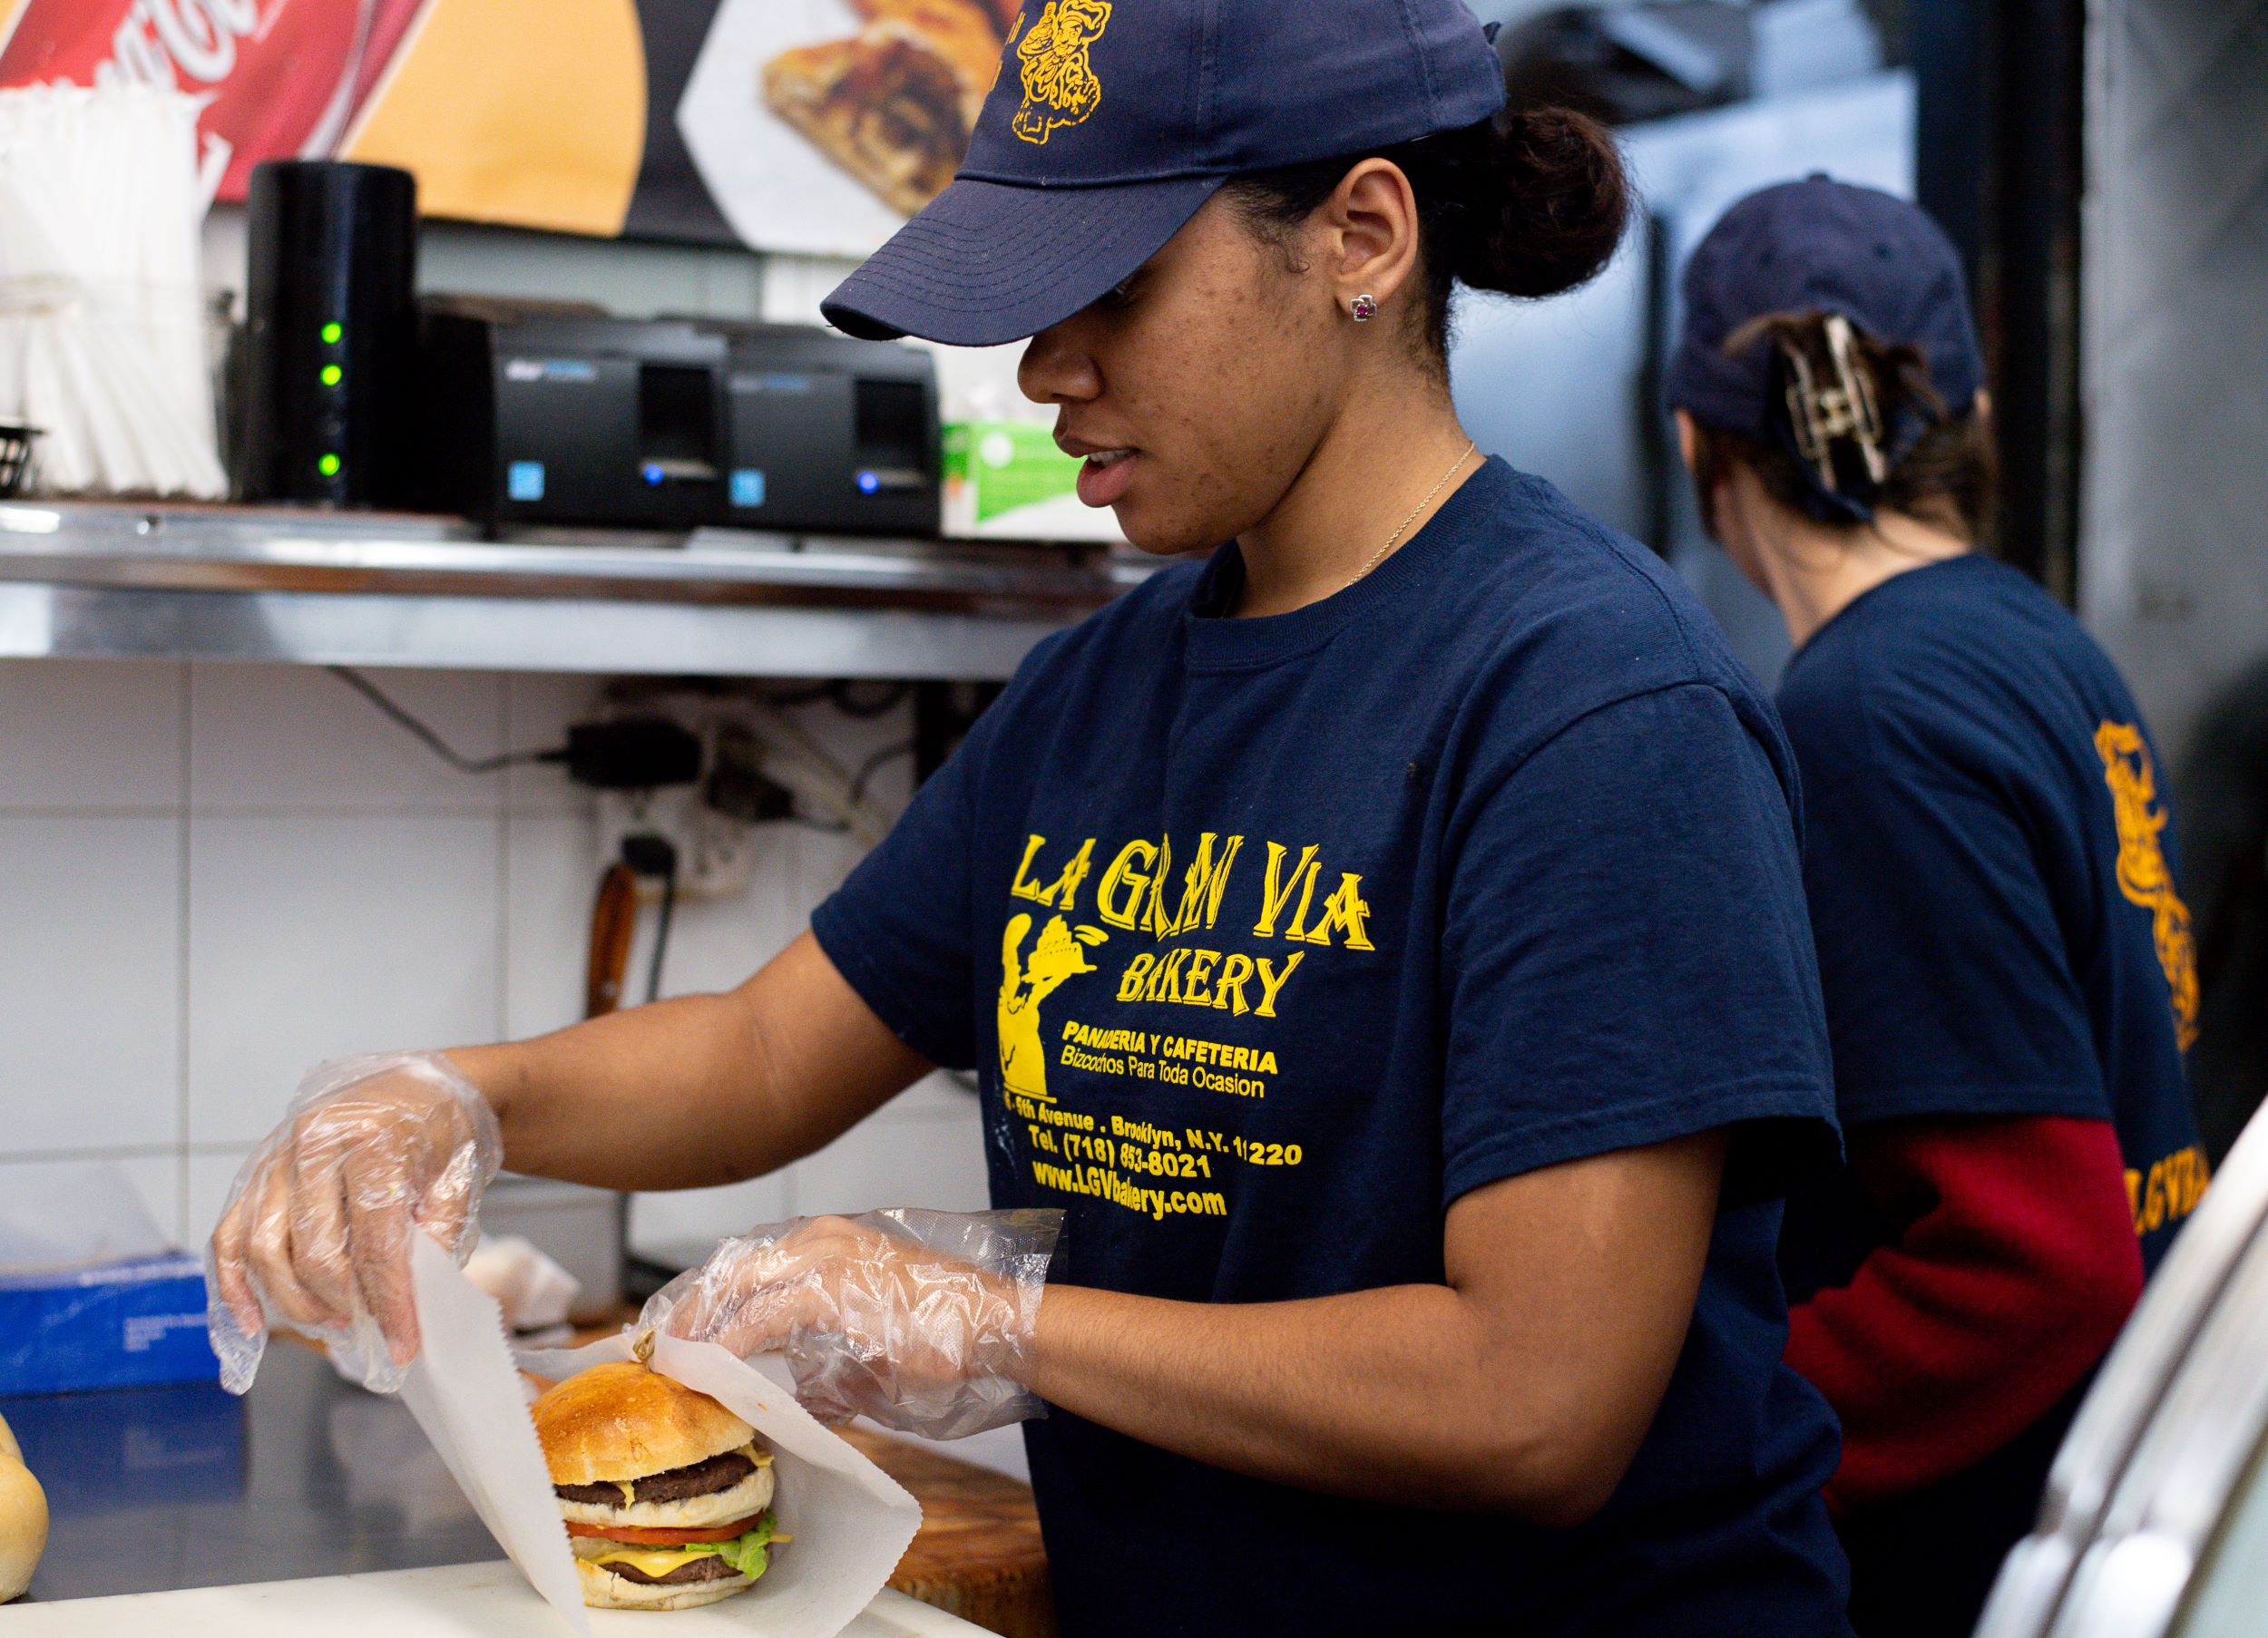 A woman wearing gloves and a branded t-shirt prepares a burger in a bustling kitchen, with another worker visible in the background.